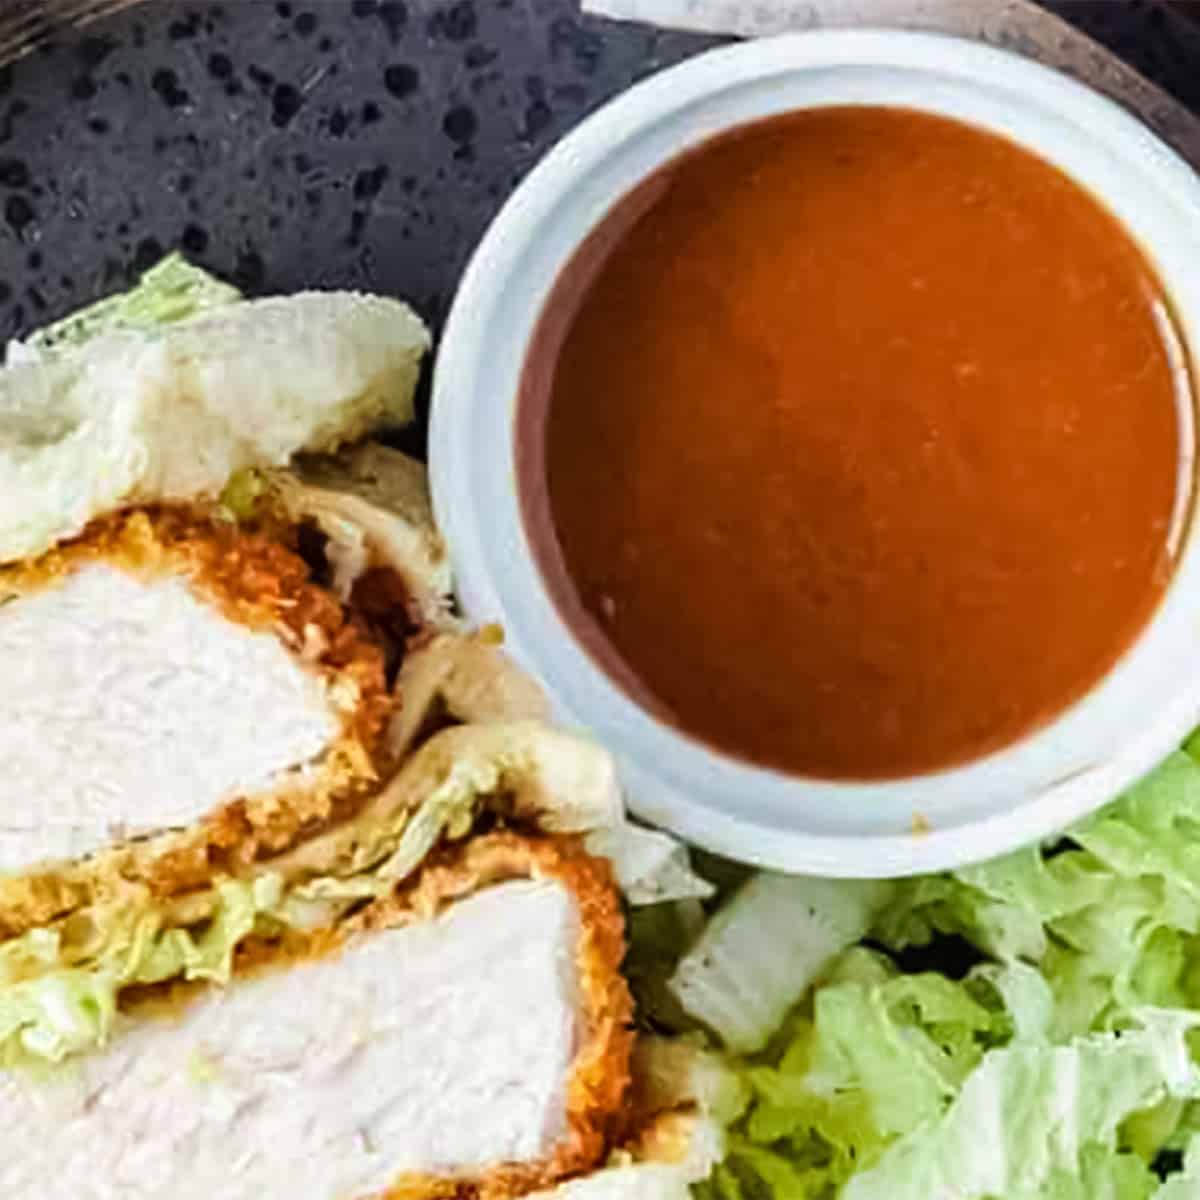 a bowl of katsu sauce, a pork cutlet sandwich and shredded cabbage on a dark plate.